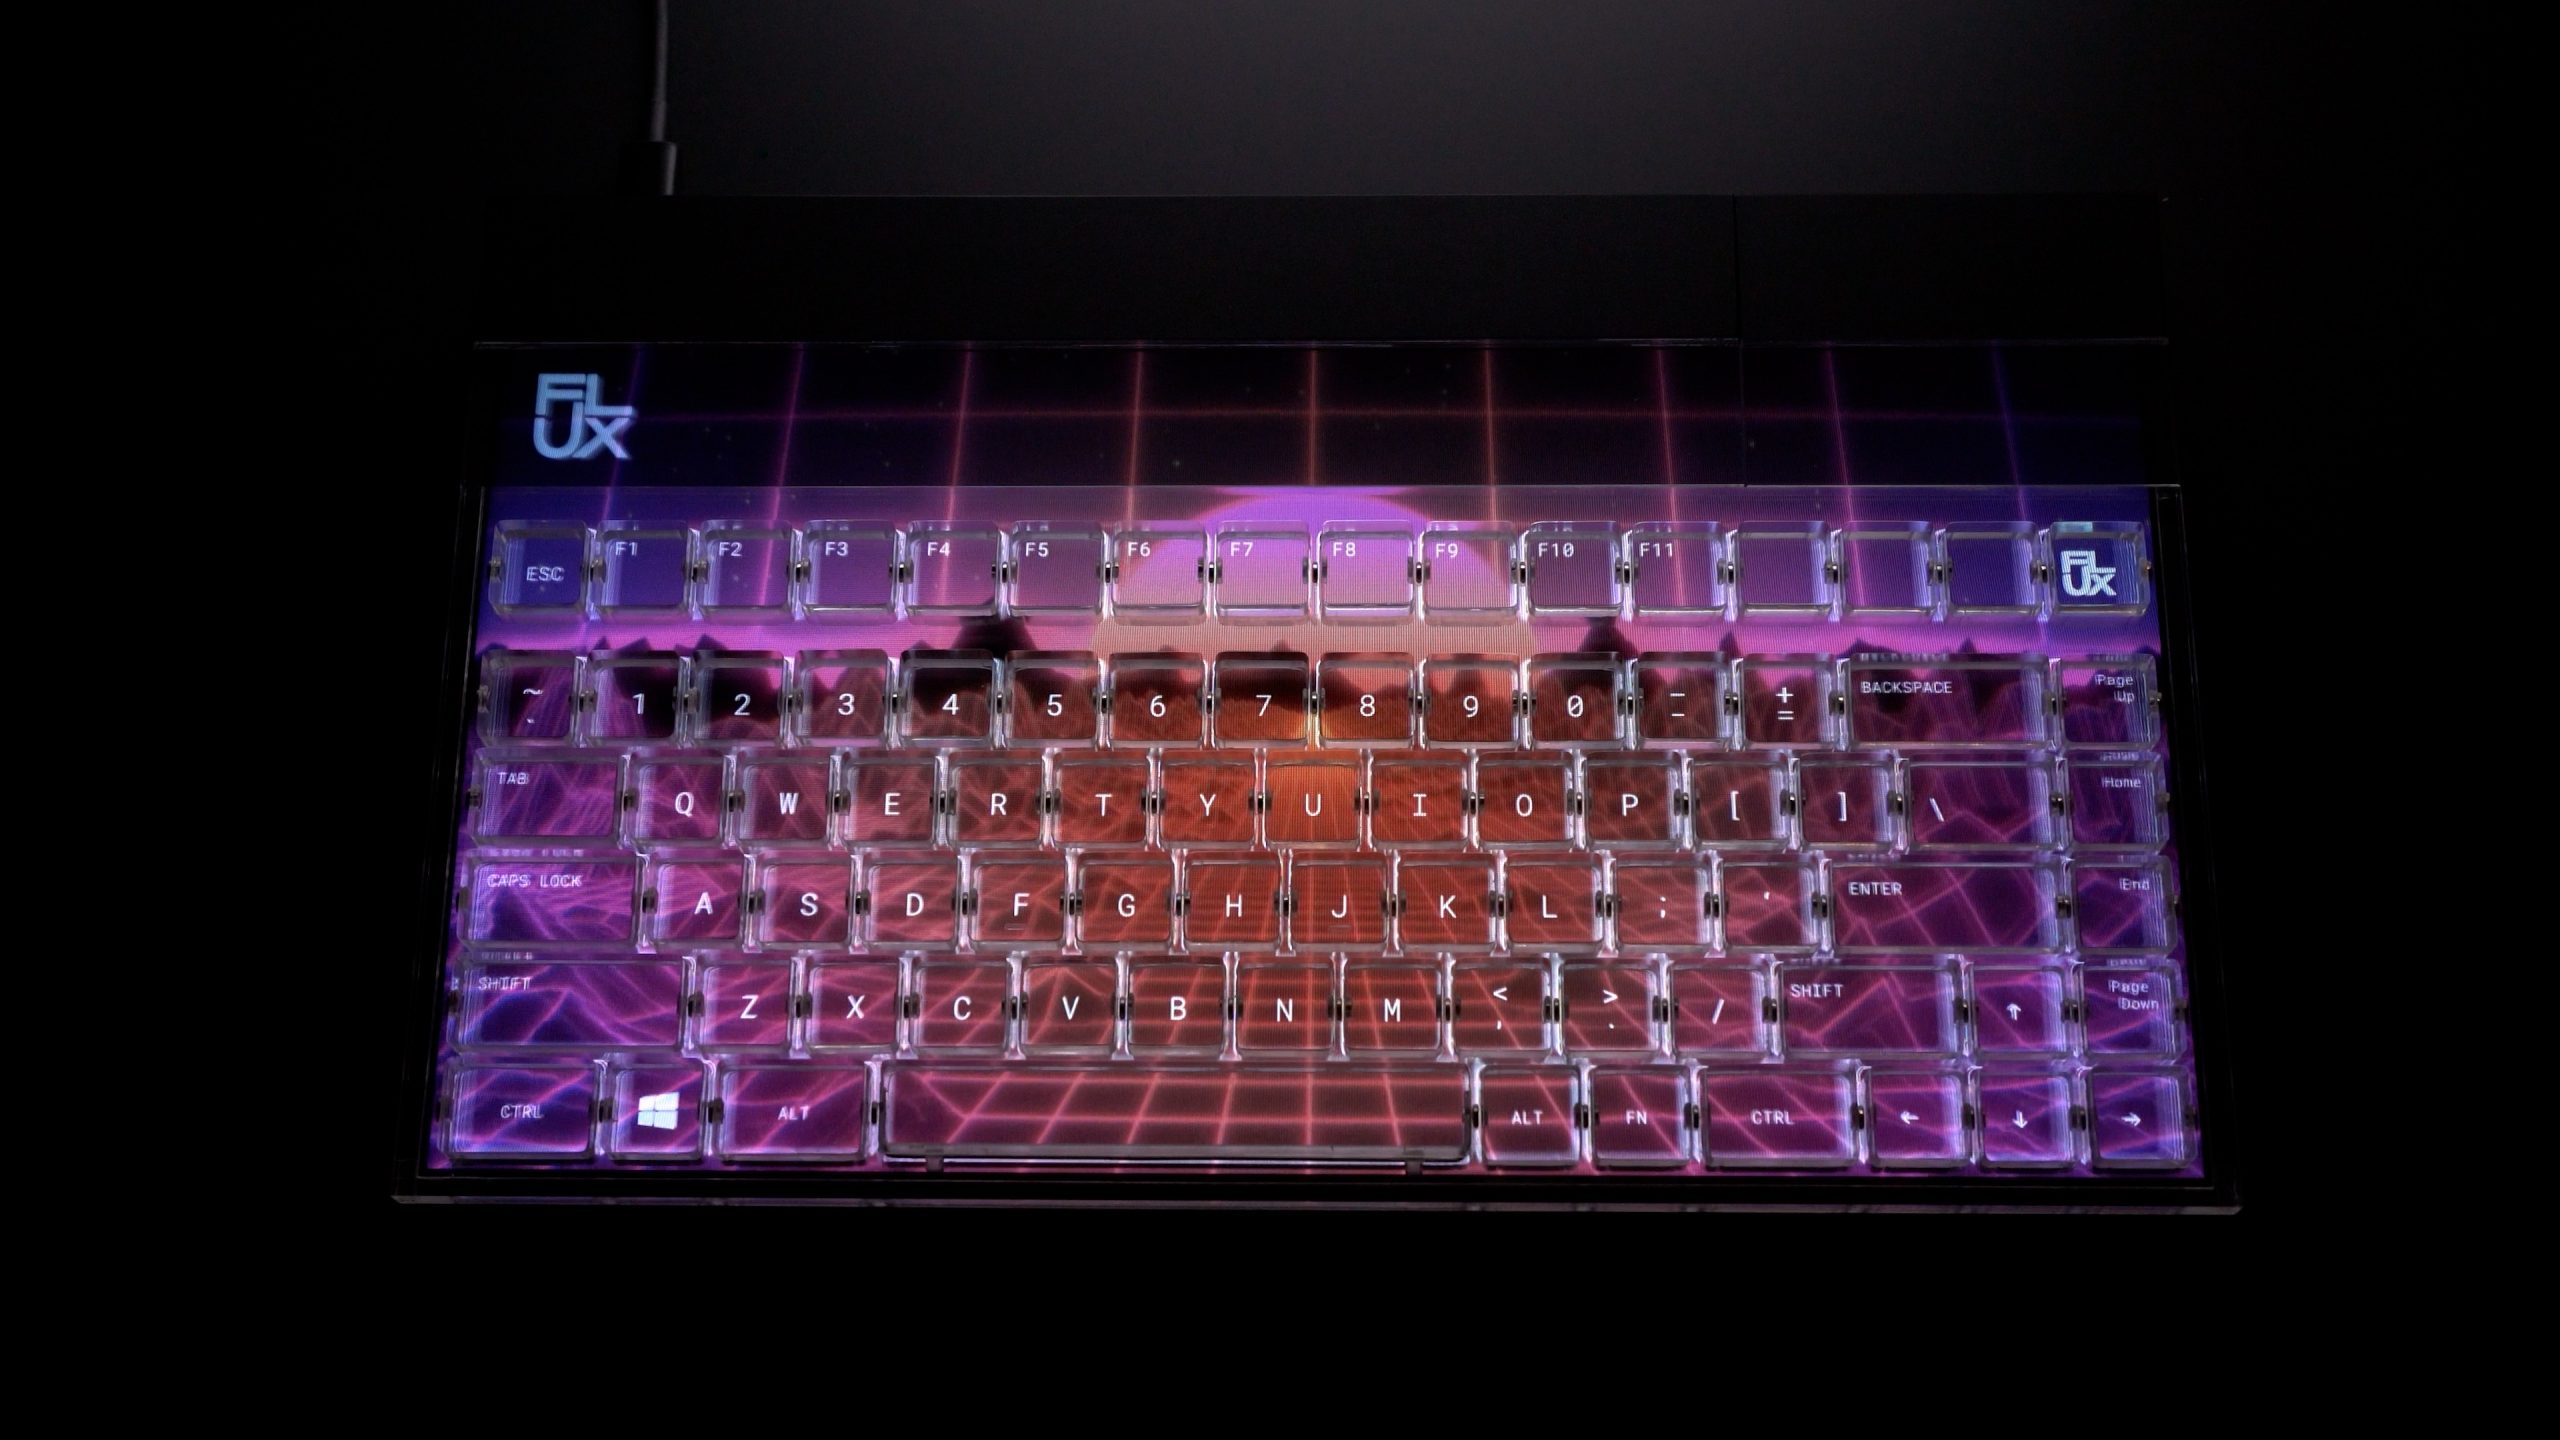 Flux Keyboard - transparent keyboard with integrated display that adapts to - Newsshooter